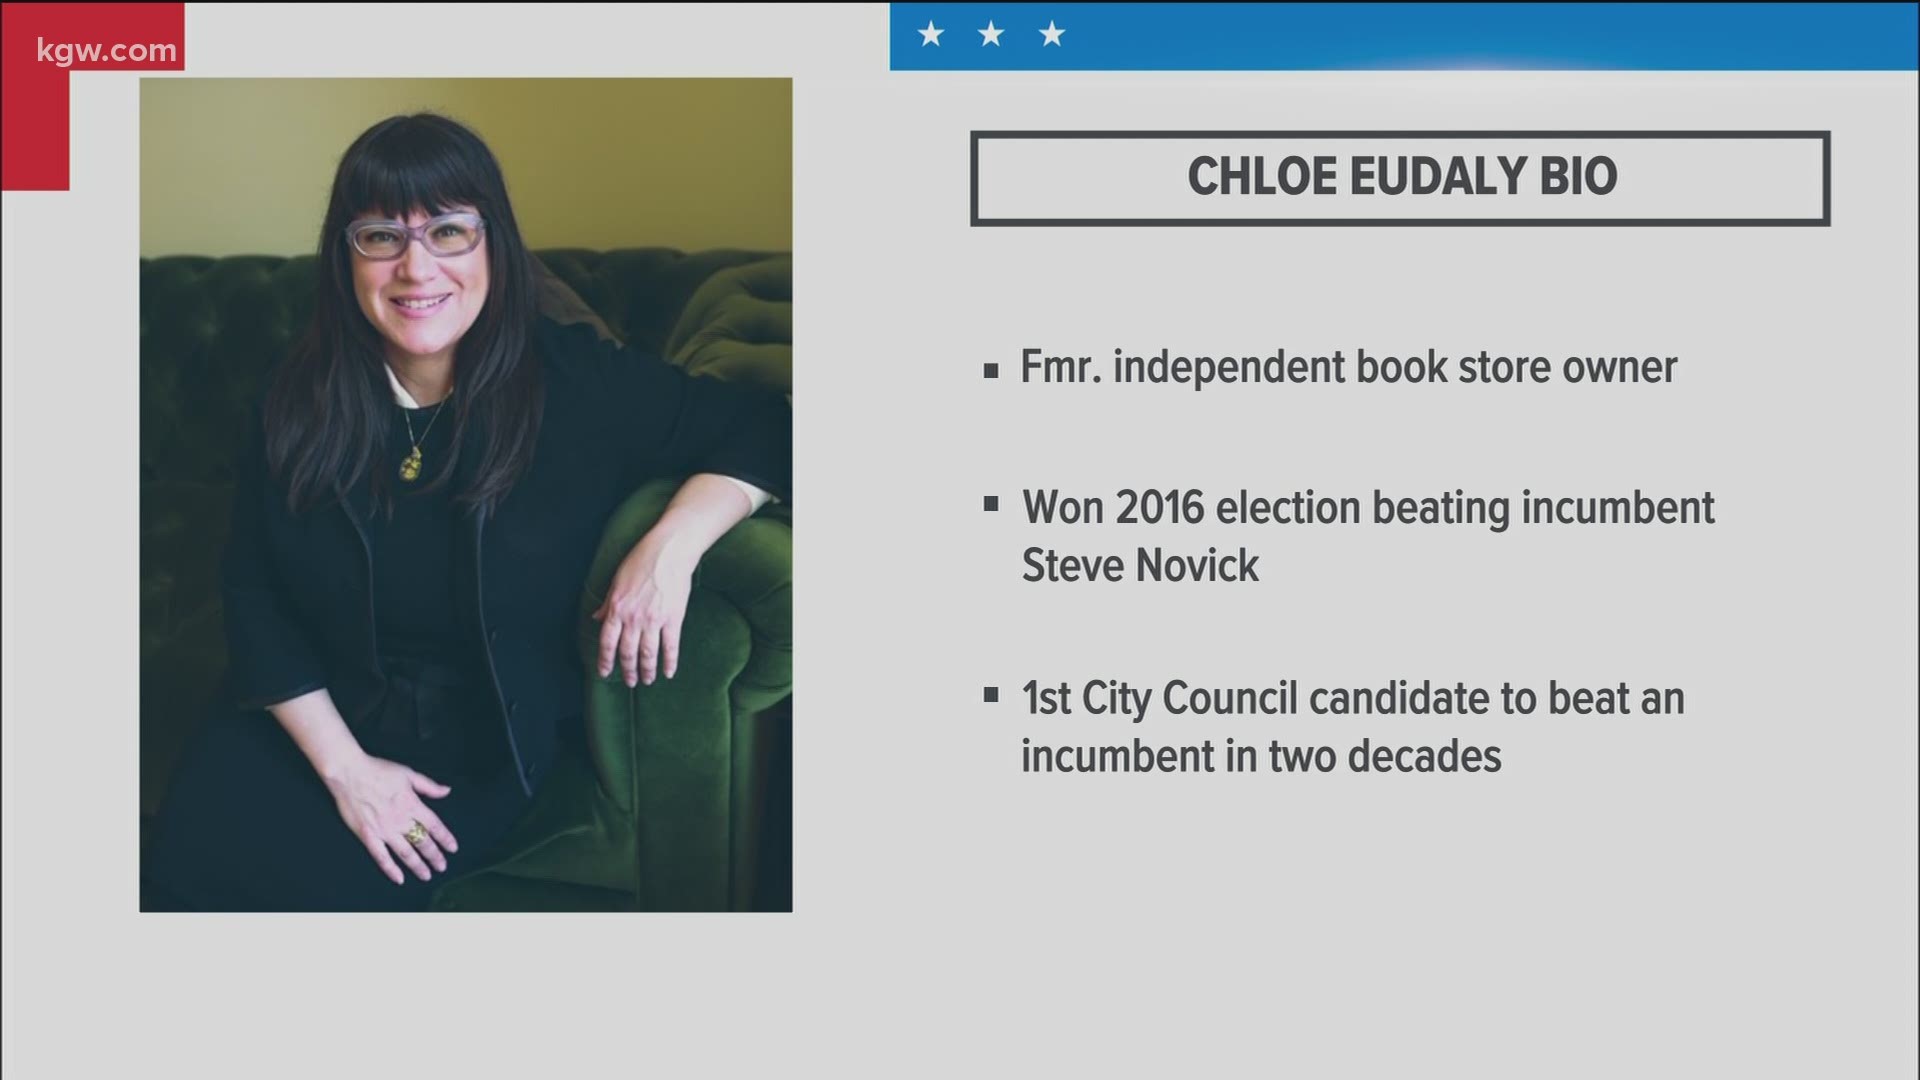 For Portlanders, one of the most important issues on the ballot is the runoff election for city council between incumbent Chloe Eudaly and challenger Mingus Mapps.